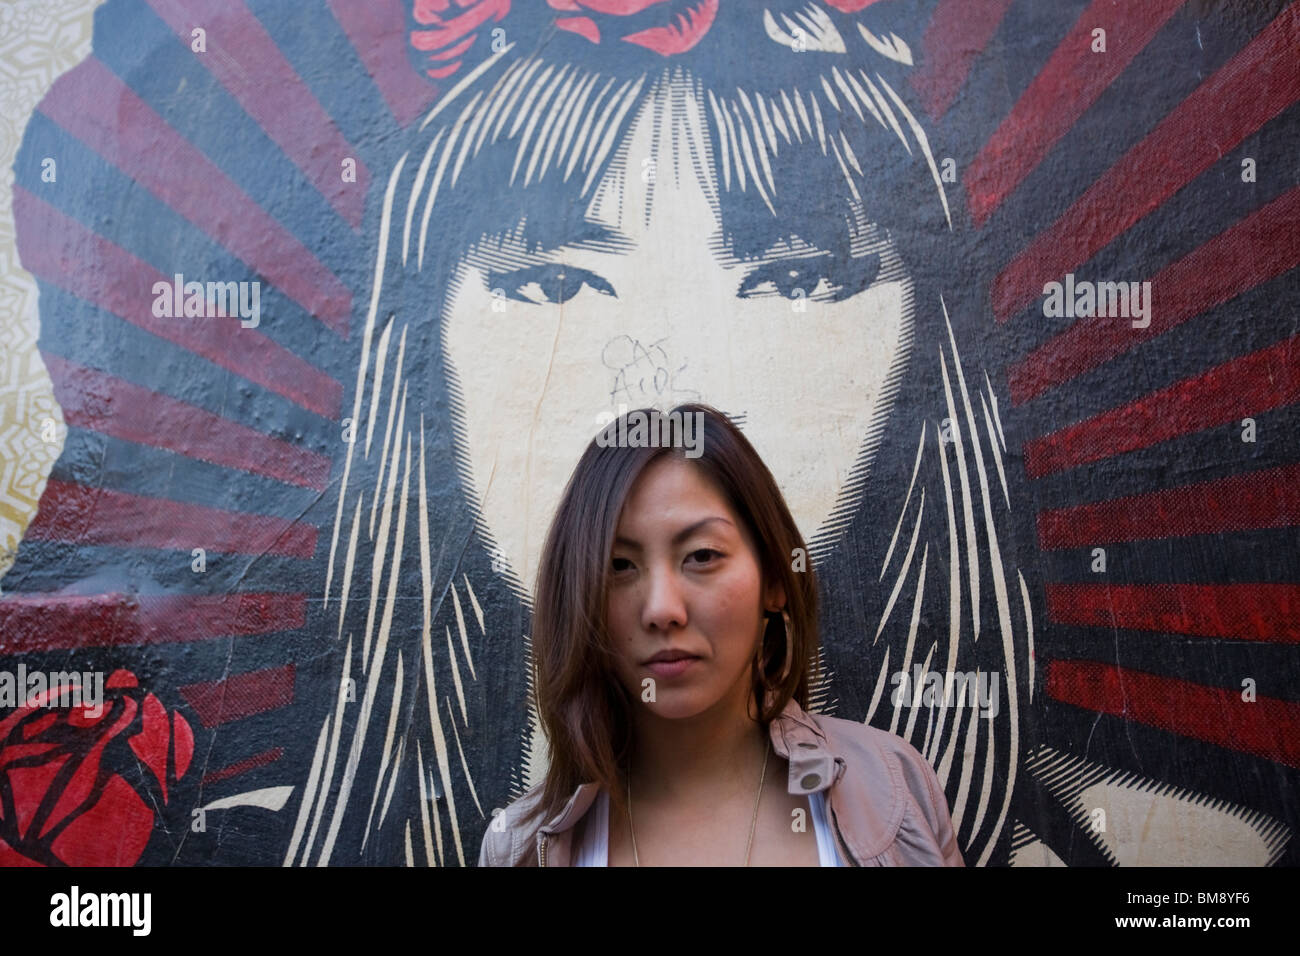 Asian female in front of wall art of Asian girl Stock Photo